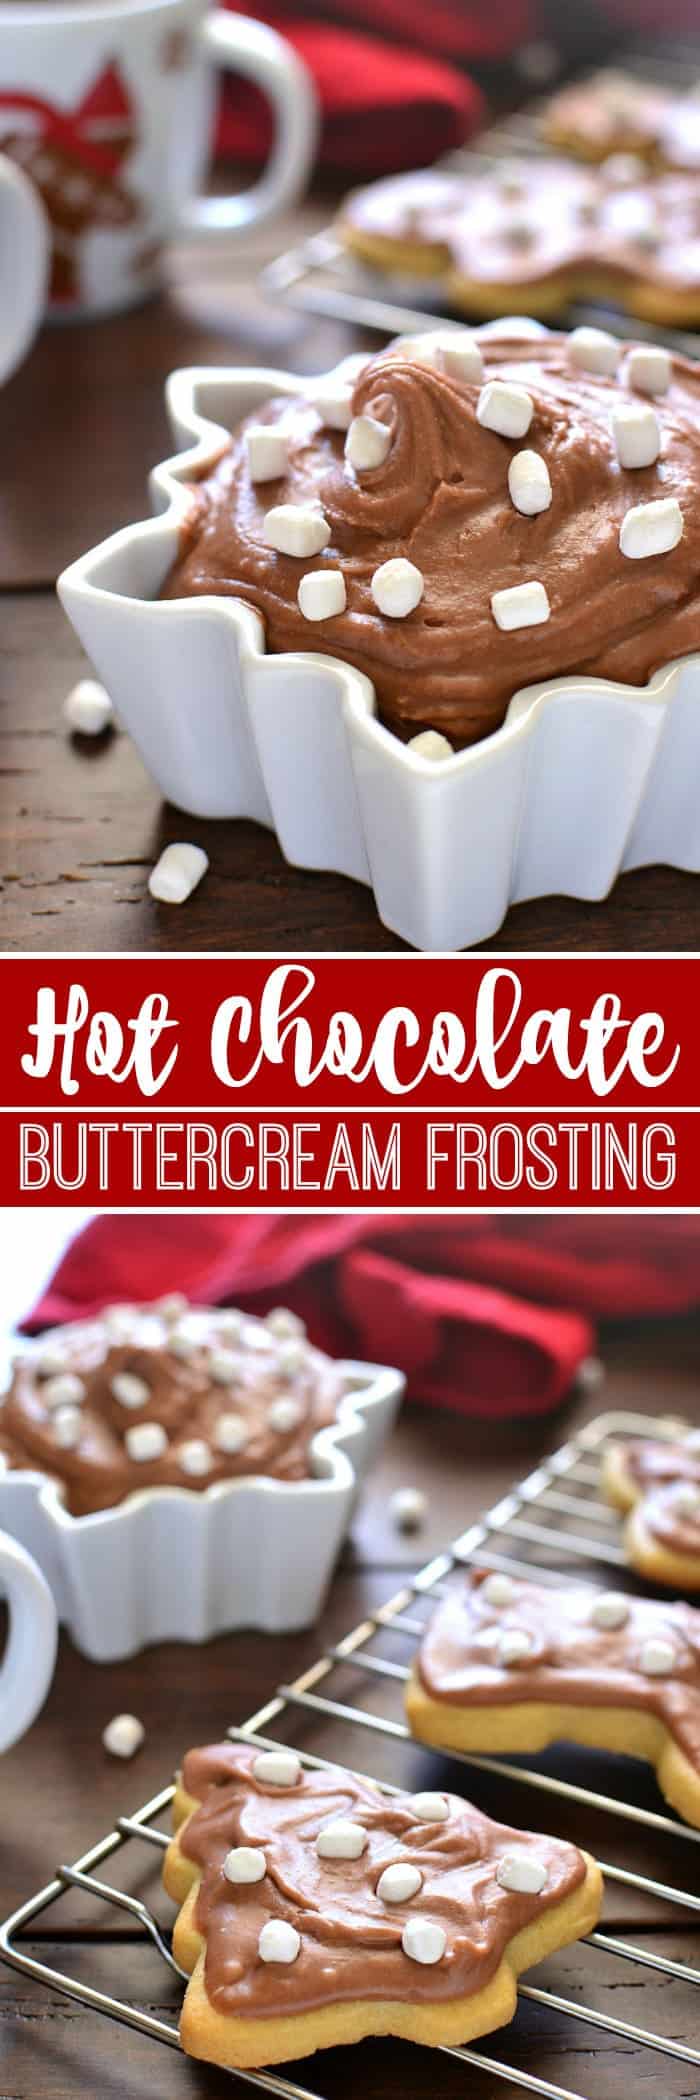  Hot Chocolate Buttercream Frosting is the perfect addition to your favorite holiday treats. This frosting whips up in 5 minutes or less. Use it on everything from cookies to cupcakes or grab a spoon and dig right in! 